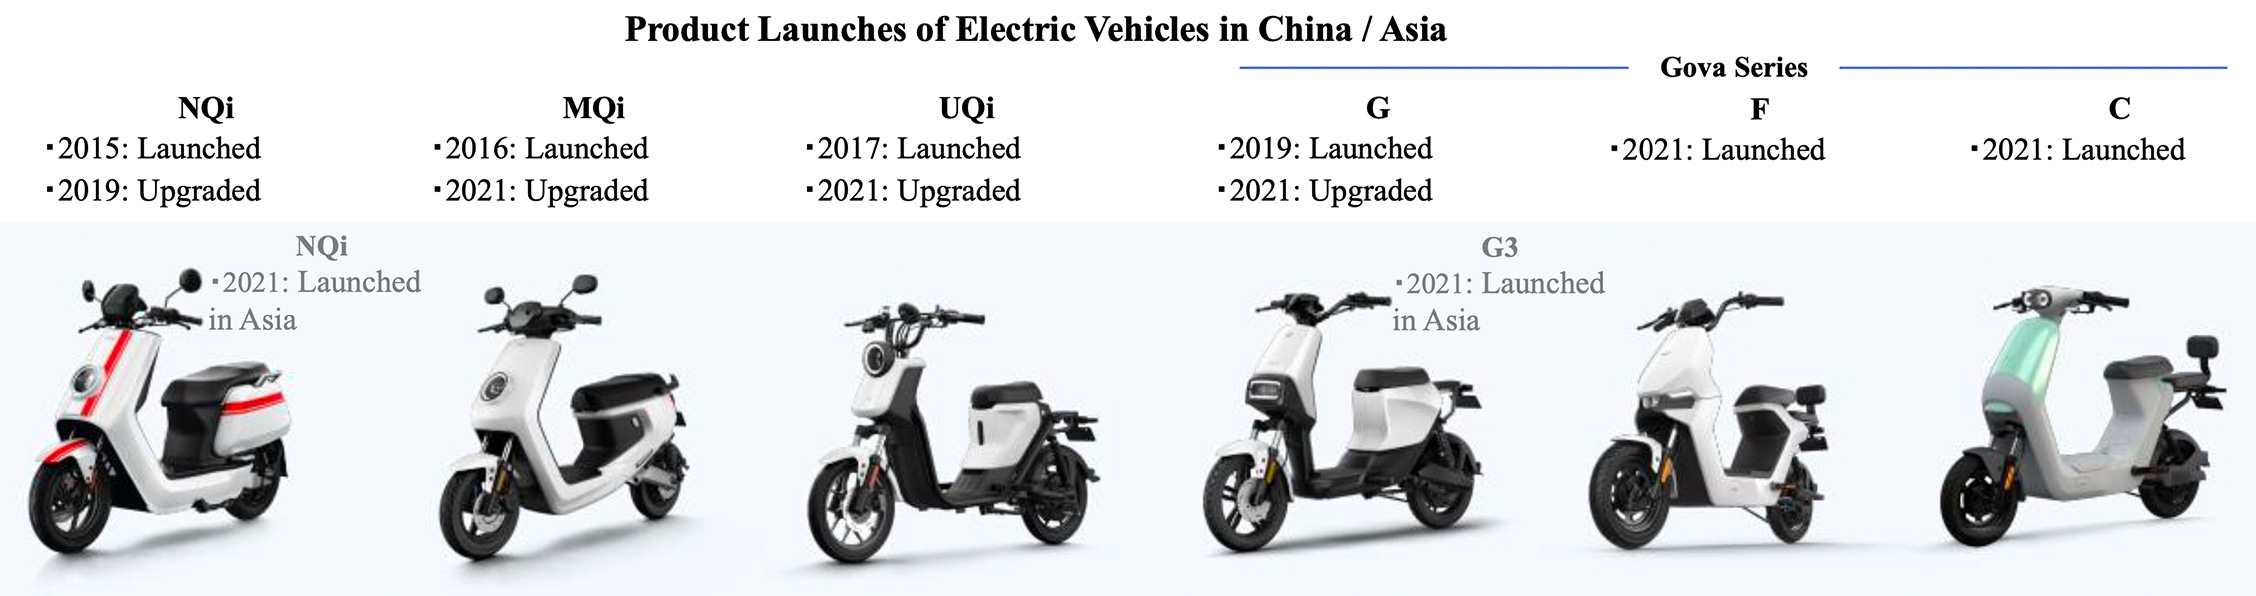 Product Launches of Electric Vehicles in China / Asia